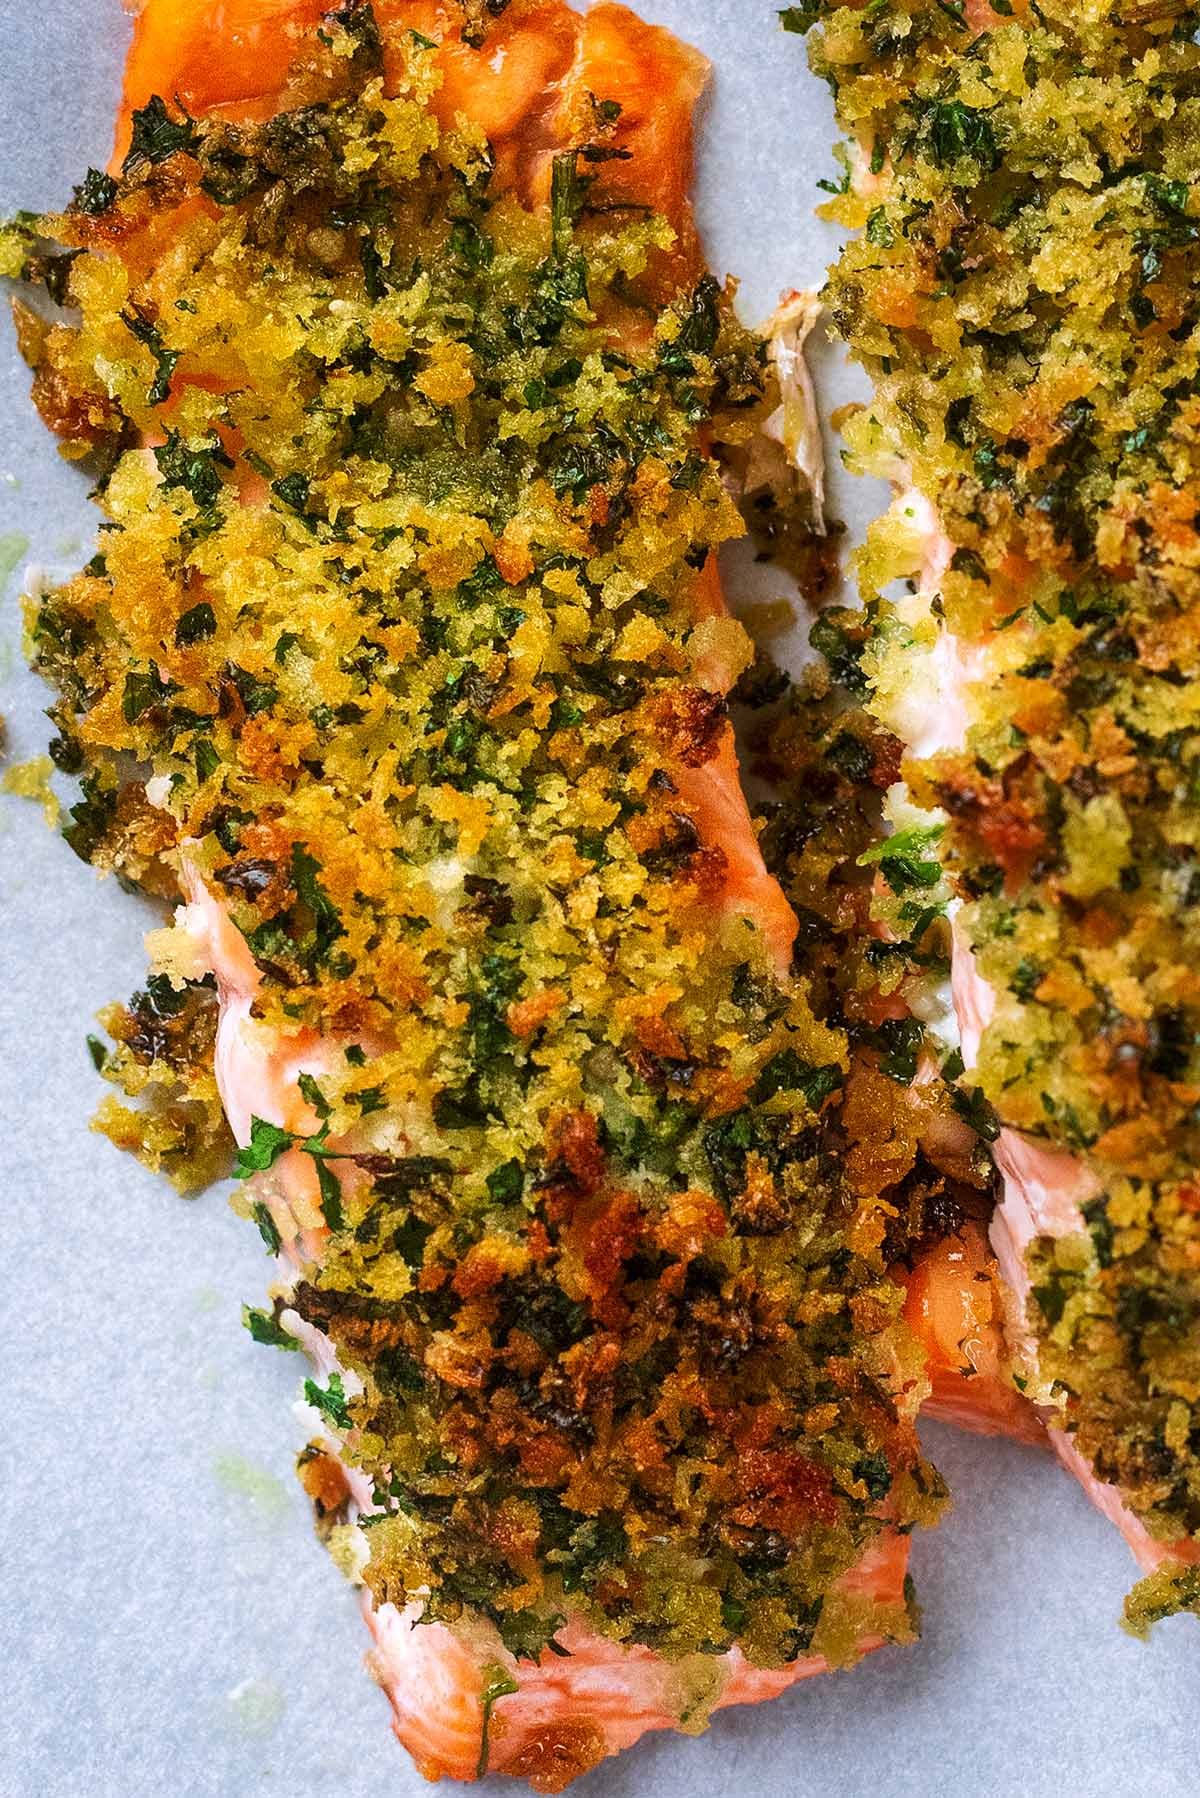 Cooked breadcrumb crust on top of a cooked salmon fillet.